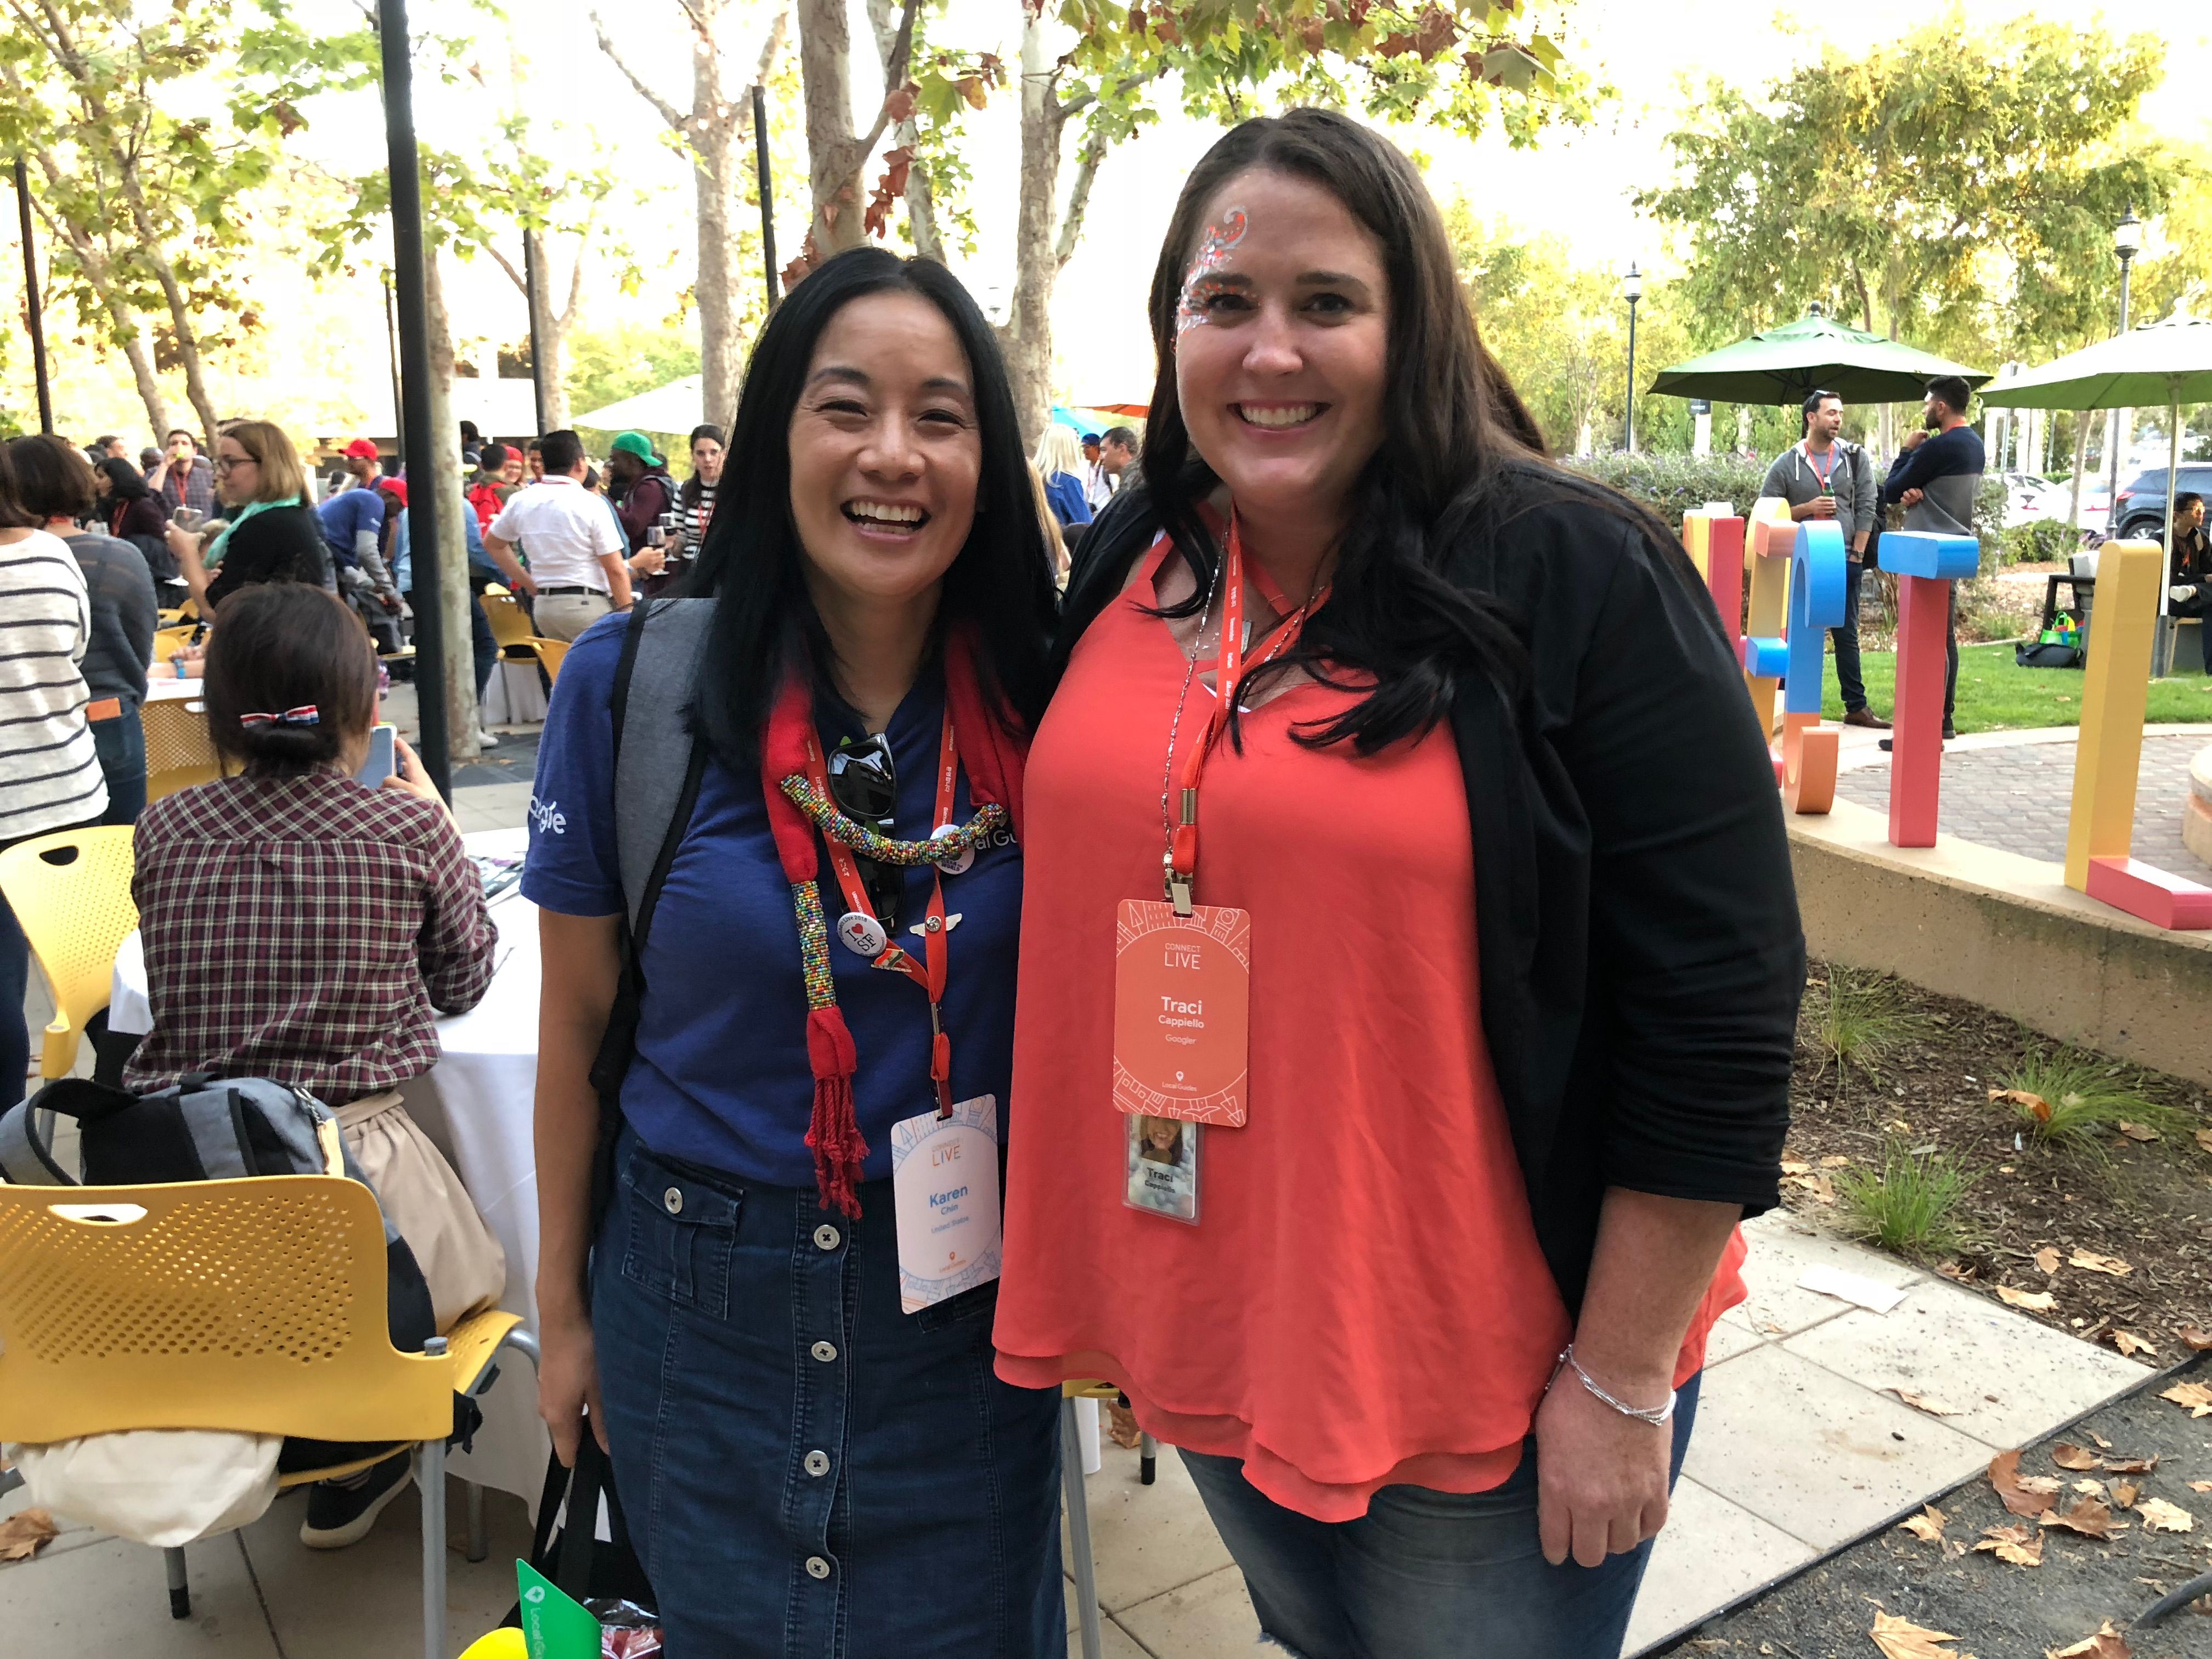 With the Birthday Girl at Connect Live 2018, The Quad - Google. Photo: @karenvchin